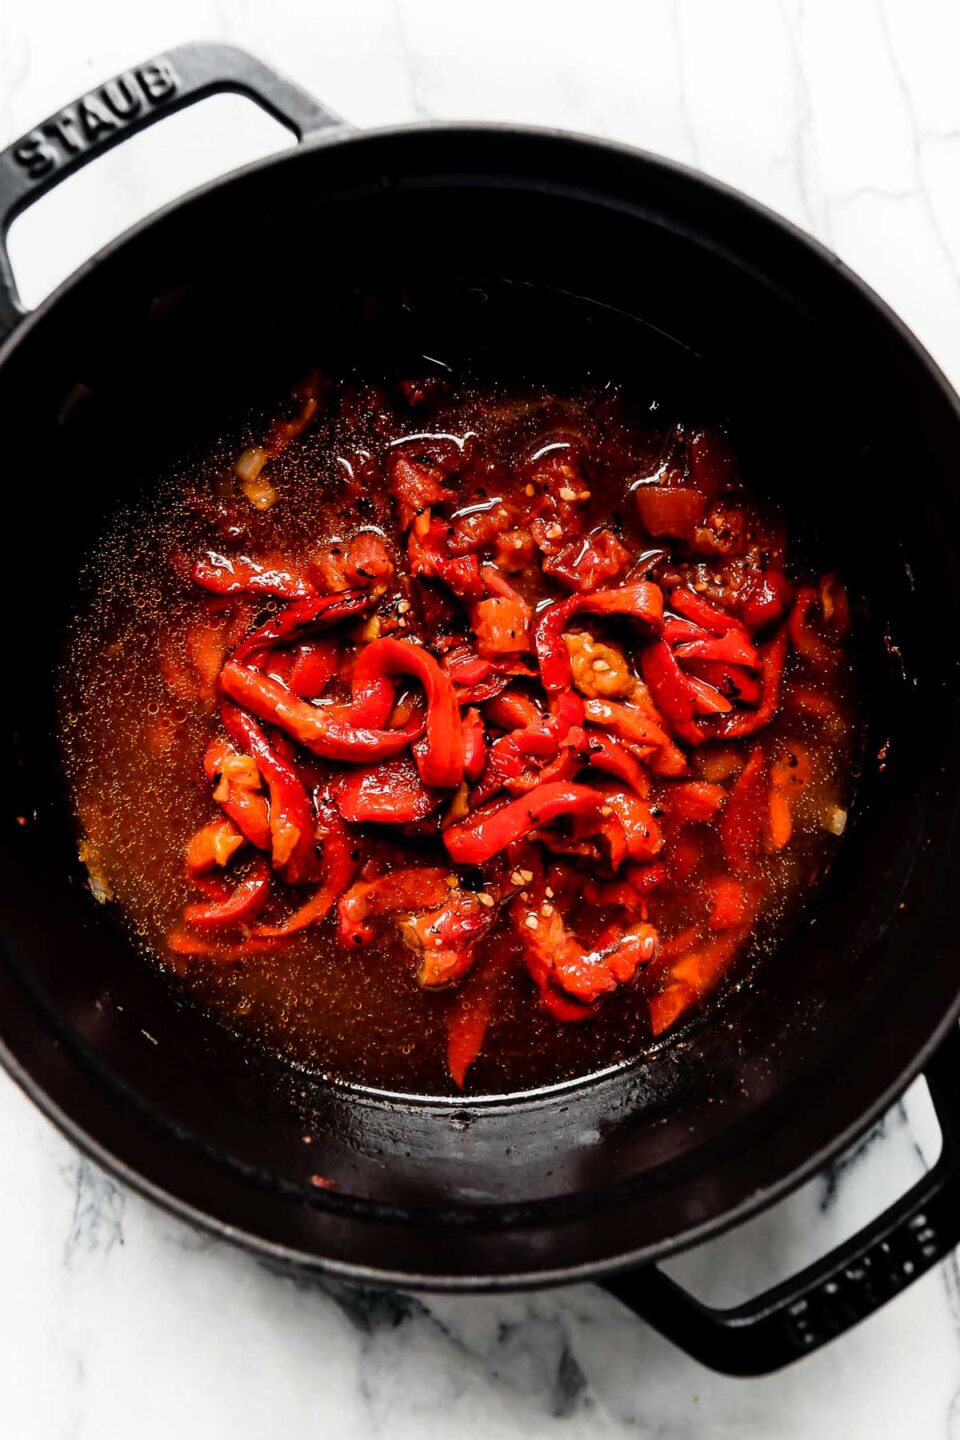 Roasted Red Peppers, crushed tomatoes, & veggie stock added to the black Staub Dutch oven for Creamy Roasted Red Pepper Soup